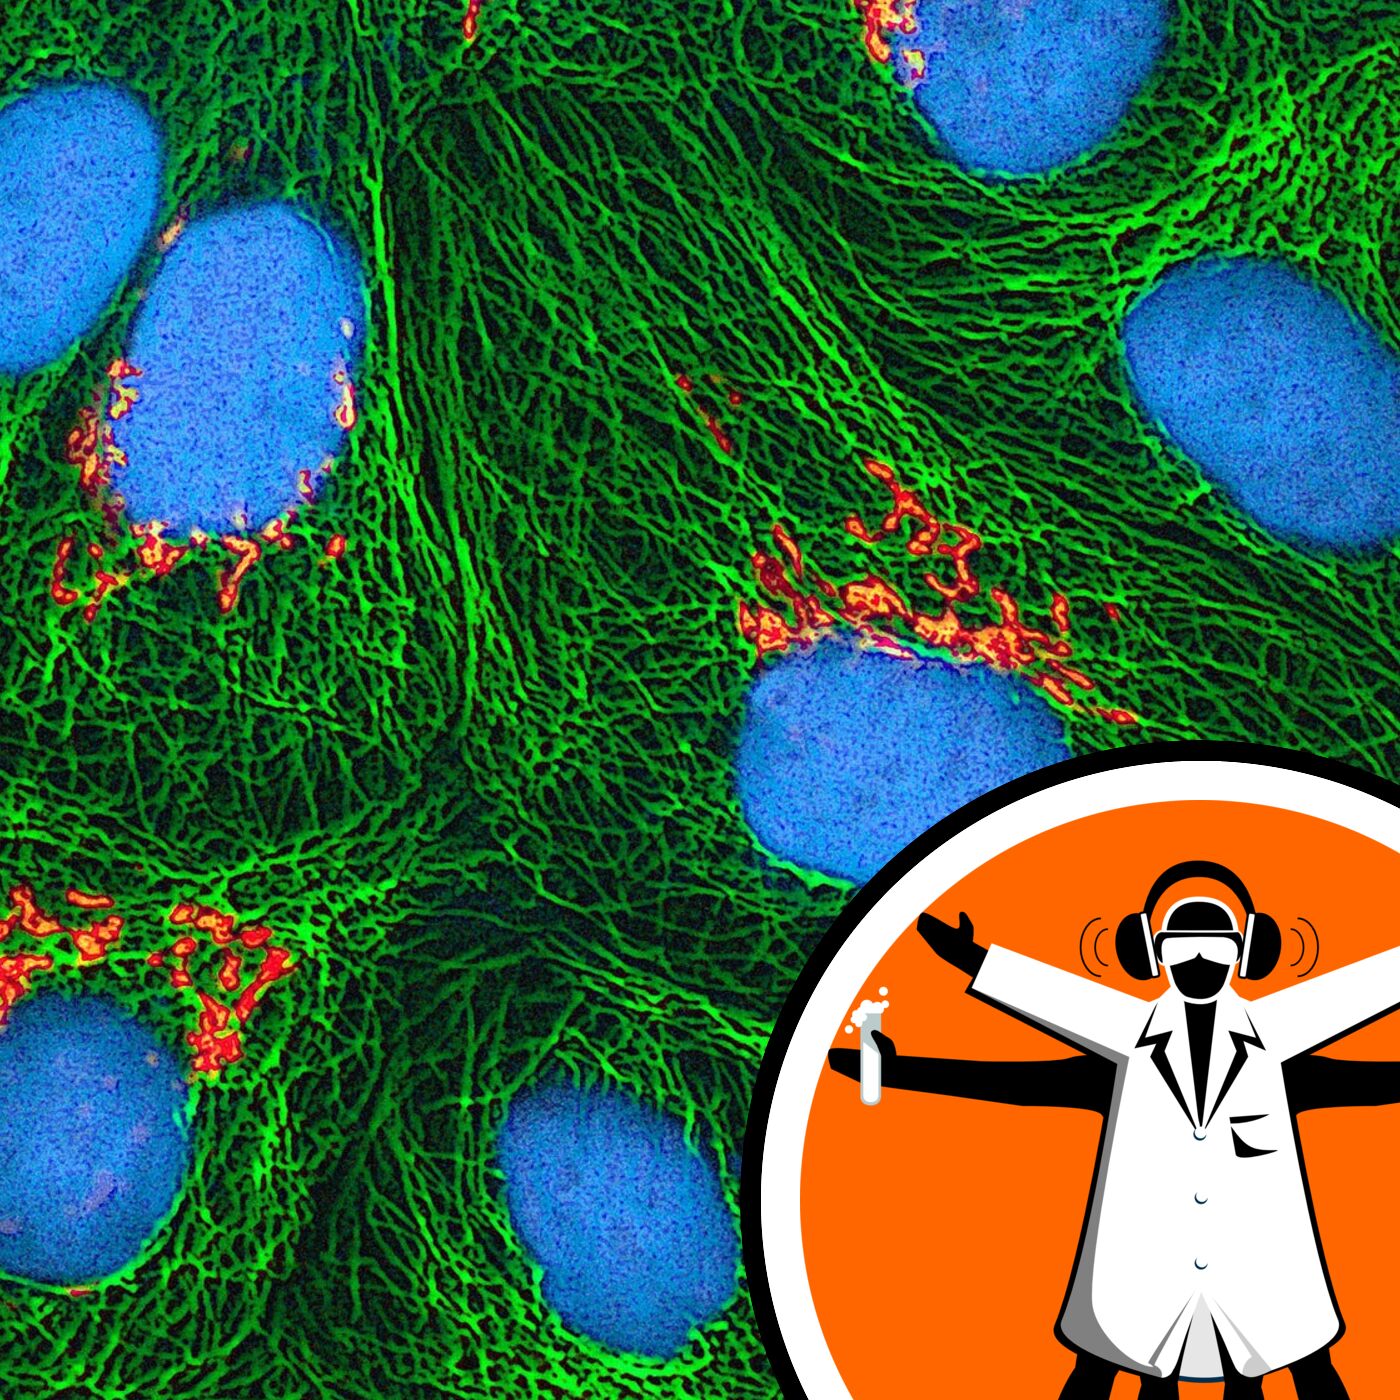 HeLa cells: do you own your own body parts?